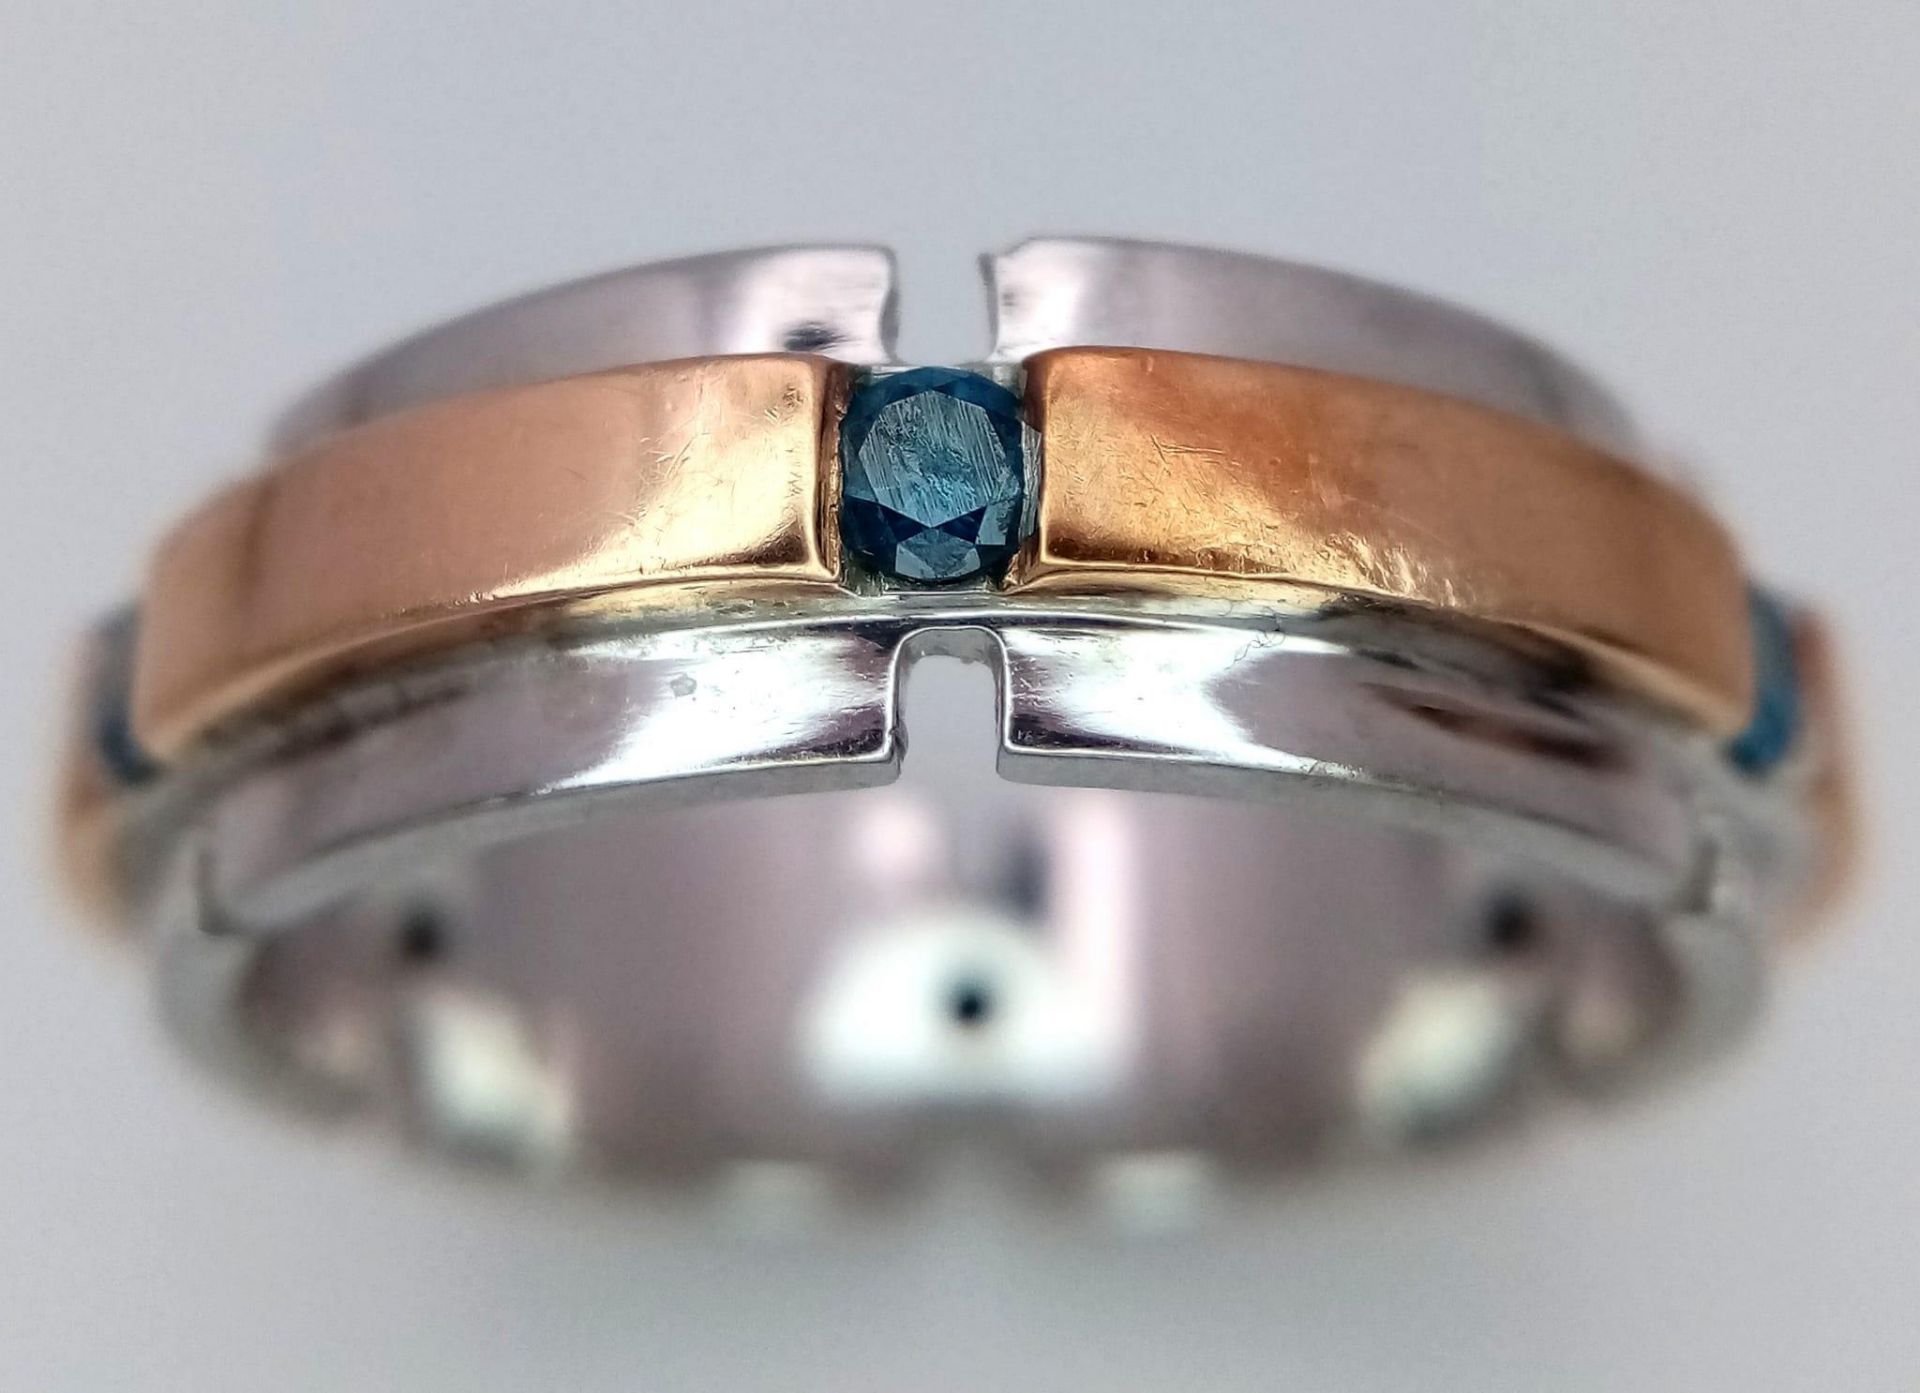 An 18K White and Rose Gold Gents Band Ring - With an eternal setting of six blue topaz stones. - Image 2 of 4